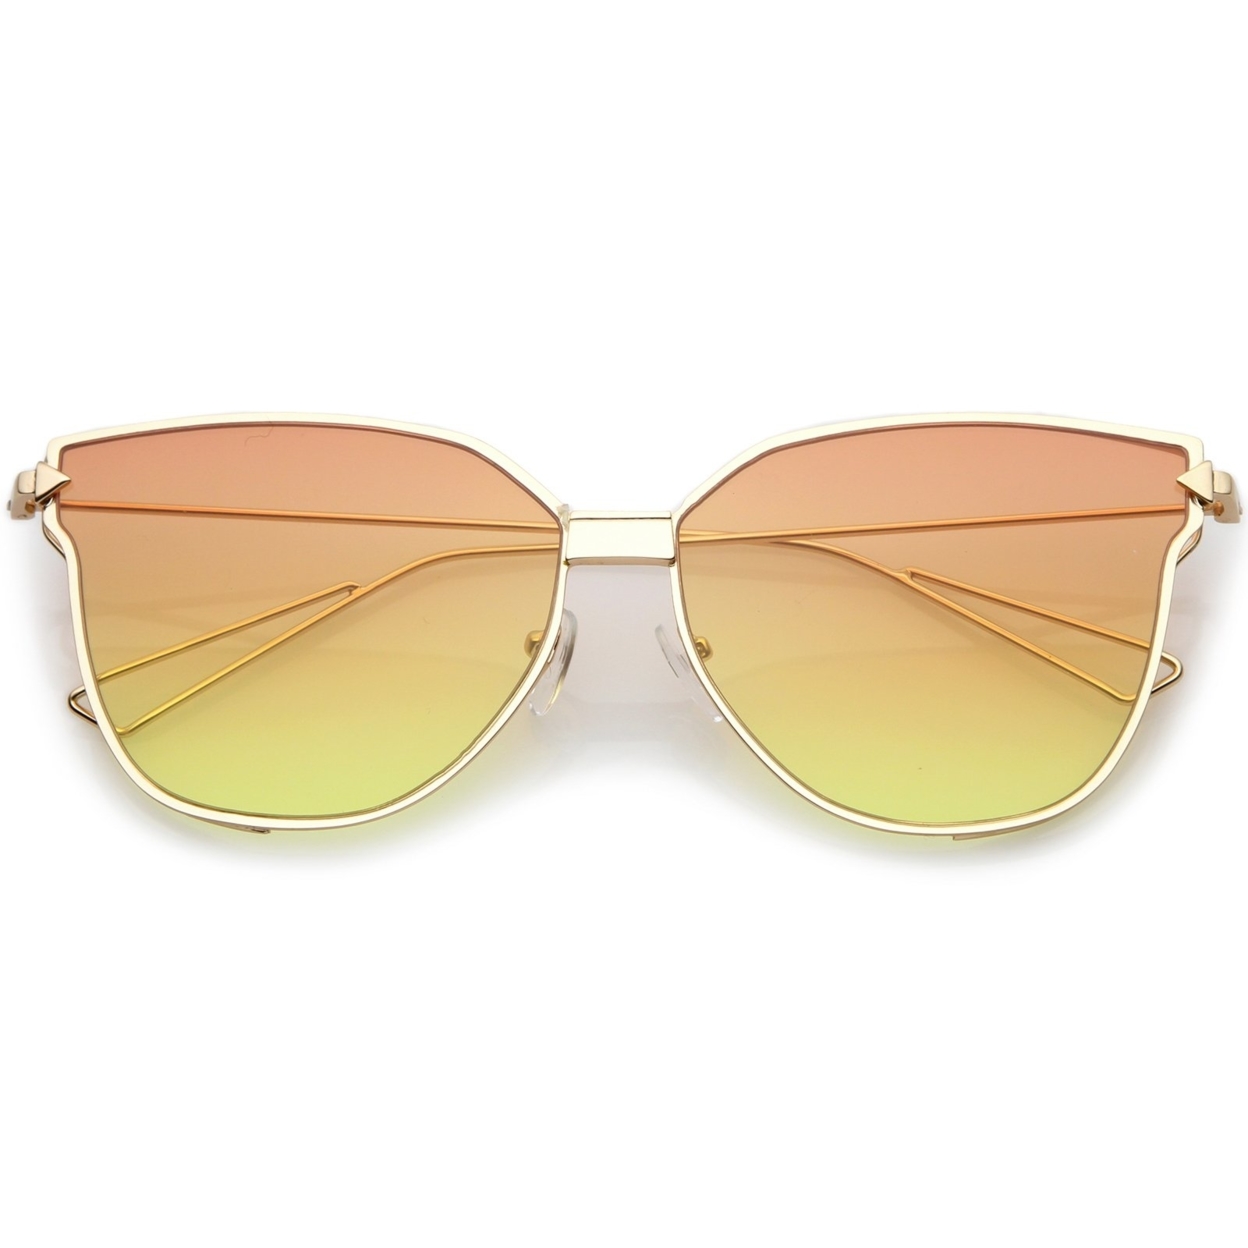 Oversize Cat Eye Sunglasses With Colorful Gradient Flat Lens And Wire Arms 59mm - Silver / Green Yellow